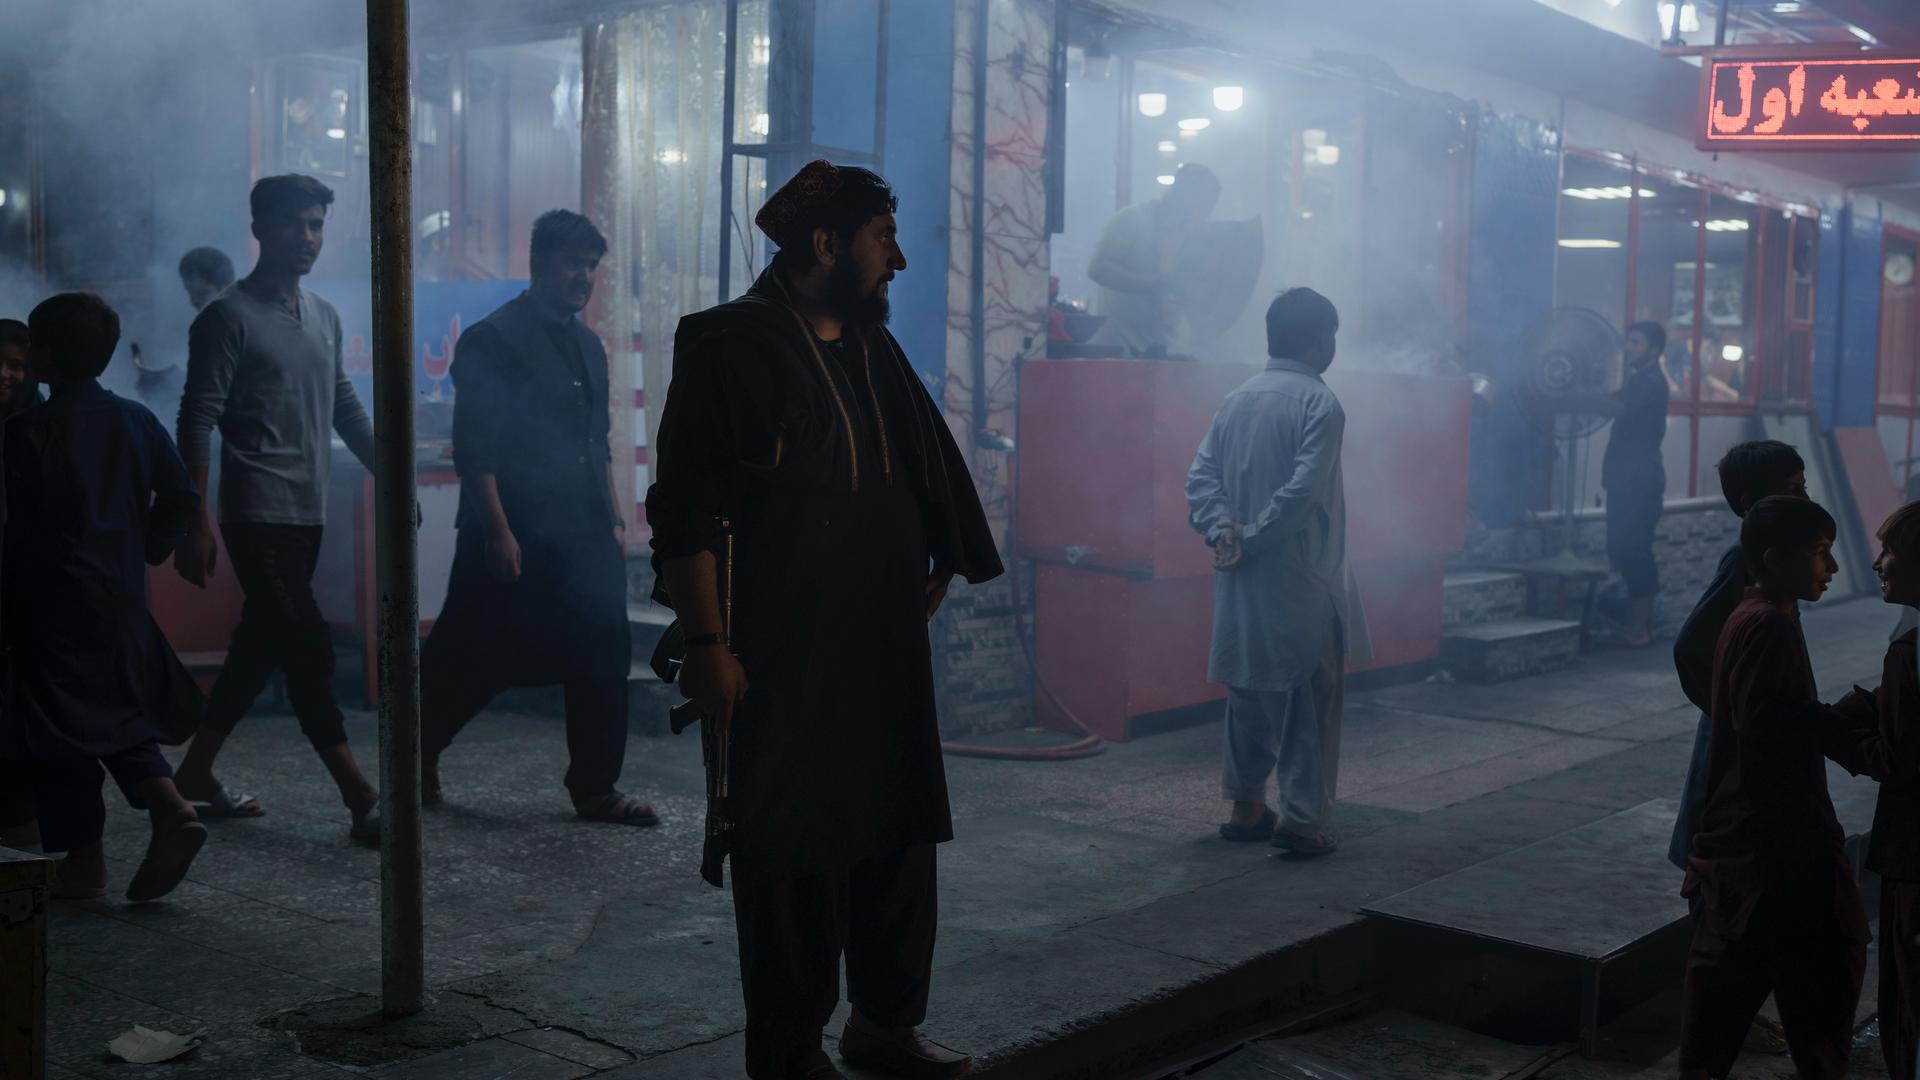 A Taliban fighter stands in the corner of a busy street at night in Kabul, Afghanistan, Sept. 17, 2021.